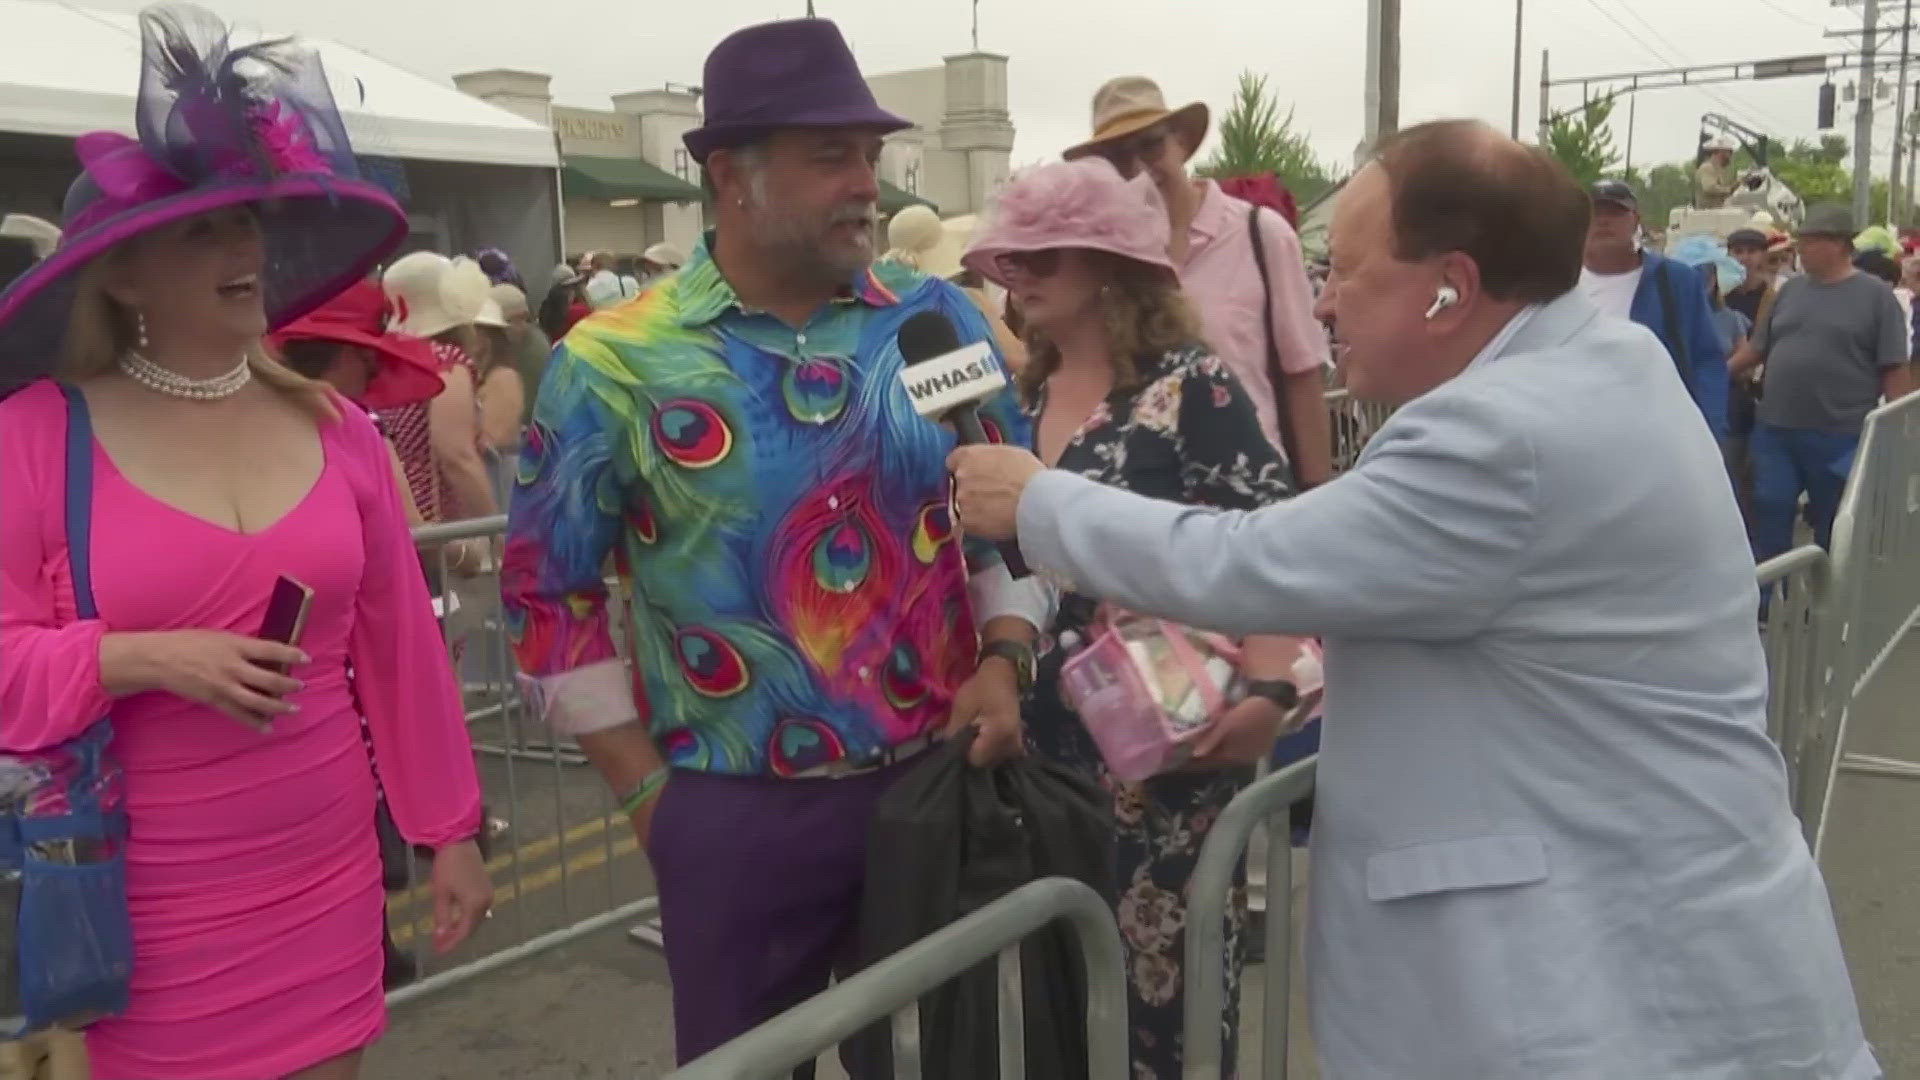 Horse racing fans from all of the U.S. have began packing Churchill Downs in what's expected to be a record-breaking crowd for the Kentucky Derby.